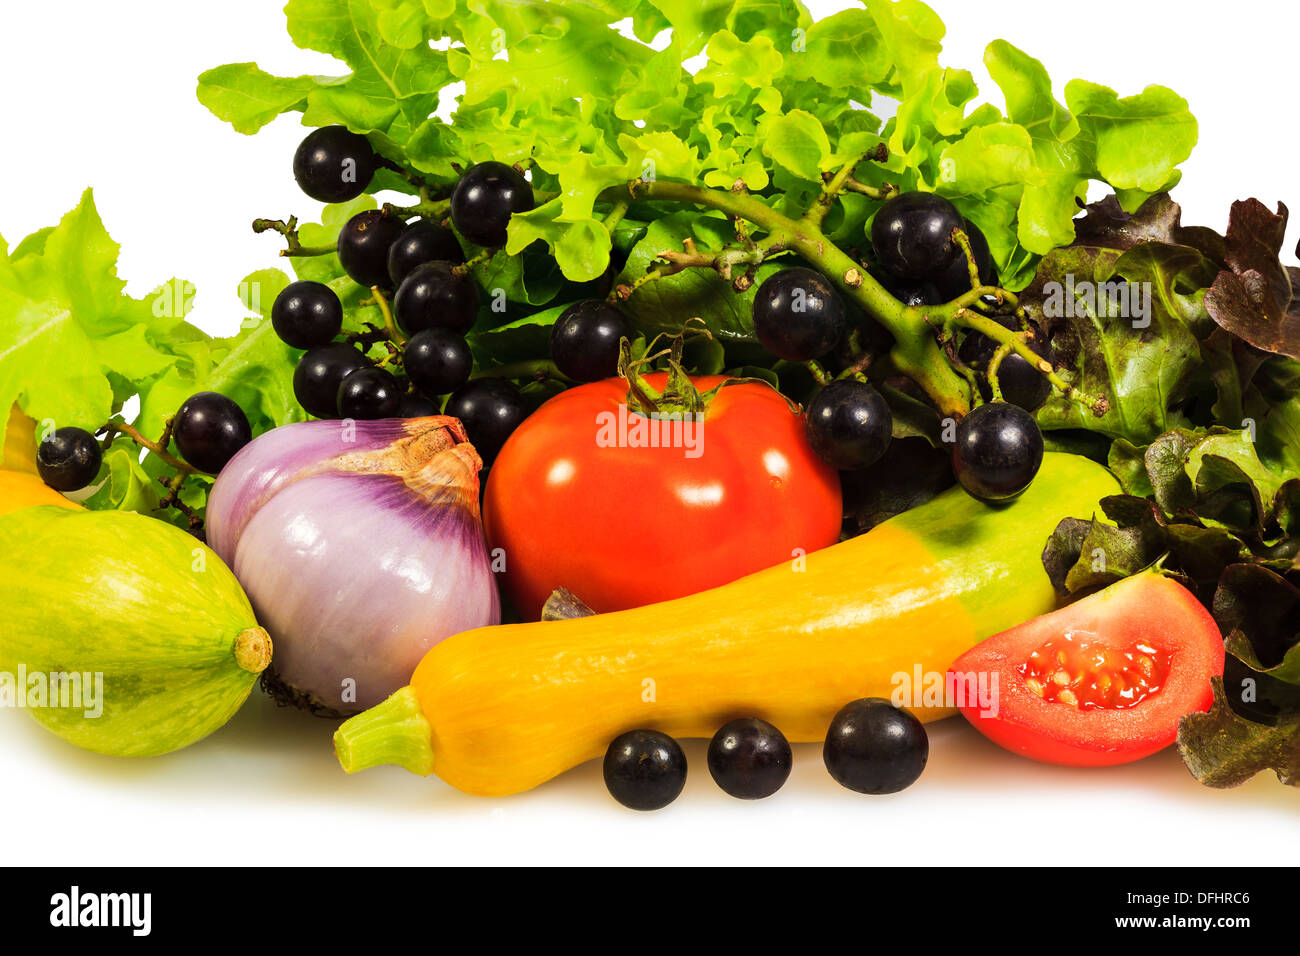 Fruits and vegetables on white background Stock Photo